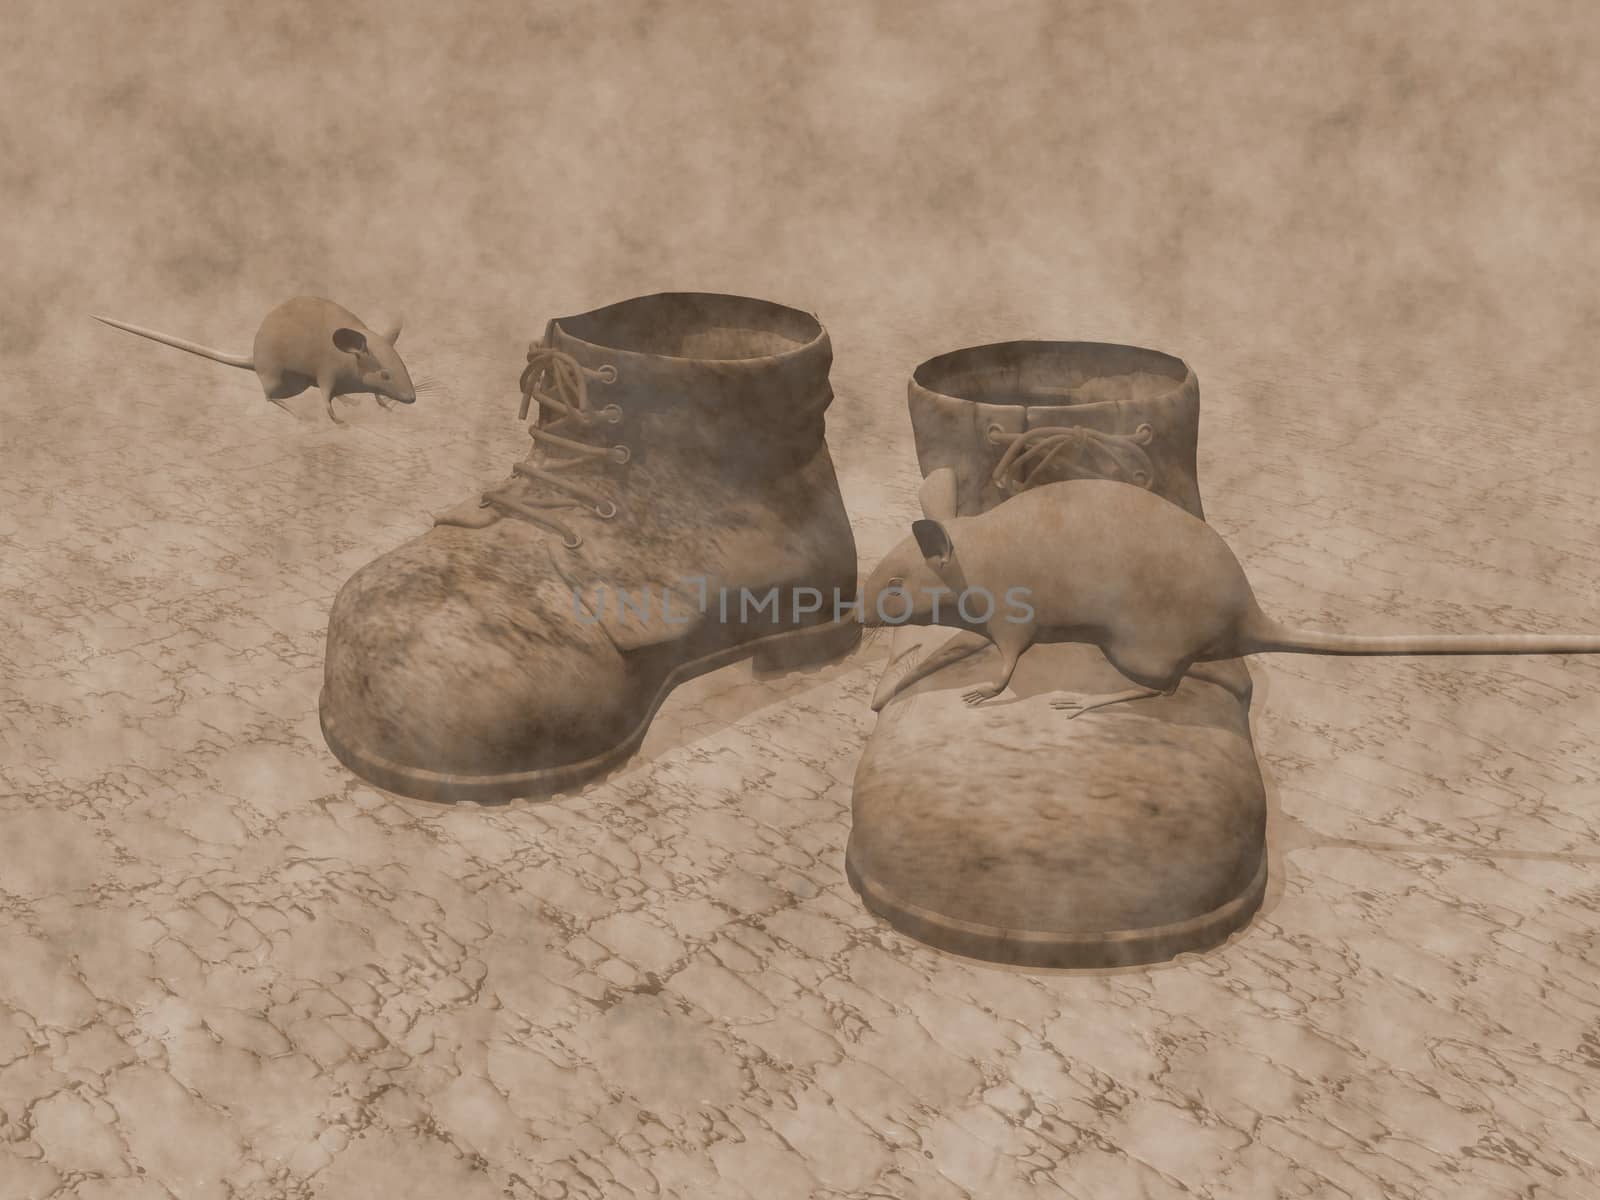 Old boots and rats - 3D render by Elenaphotos21